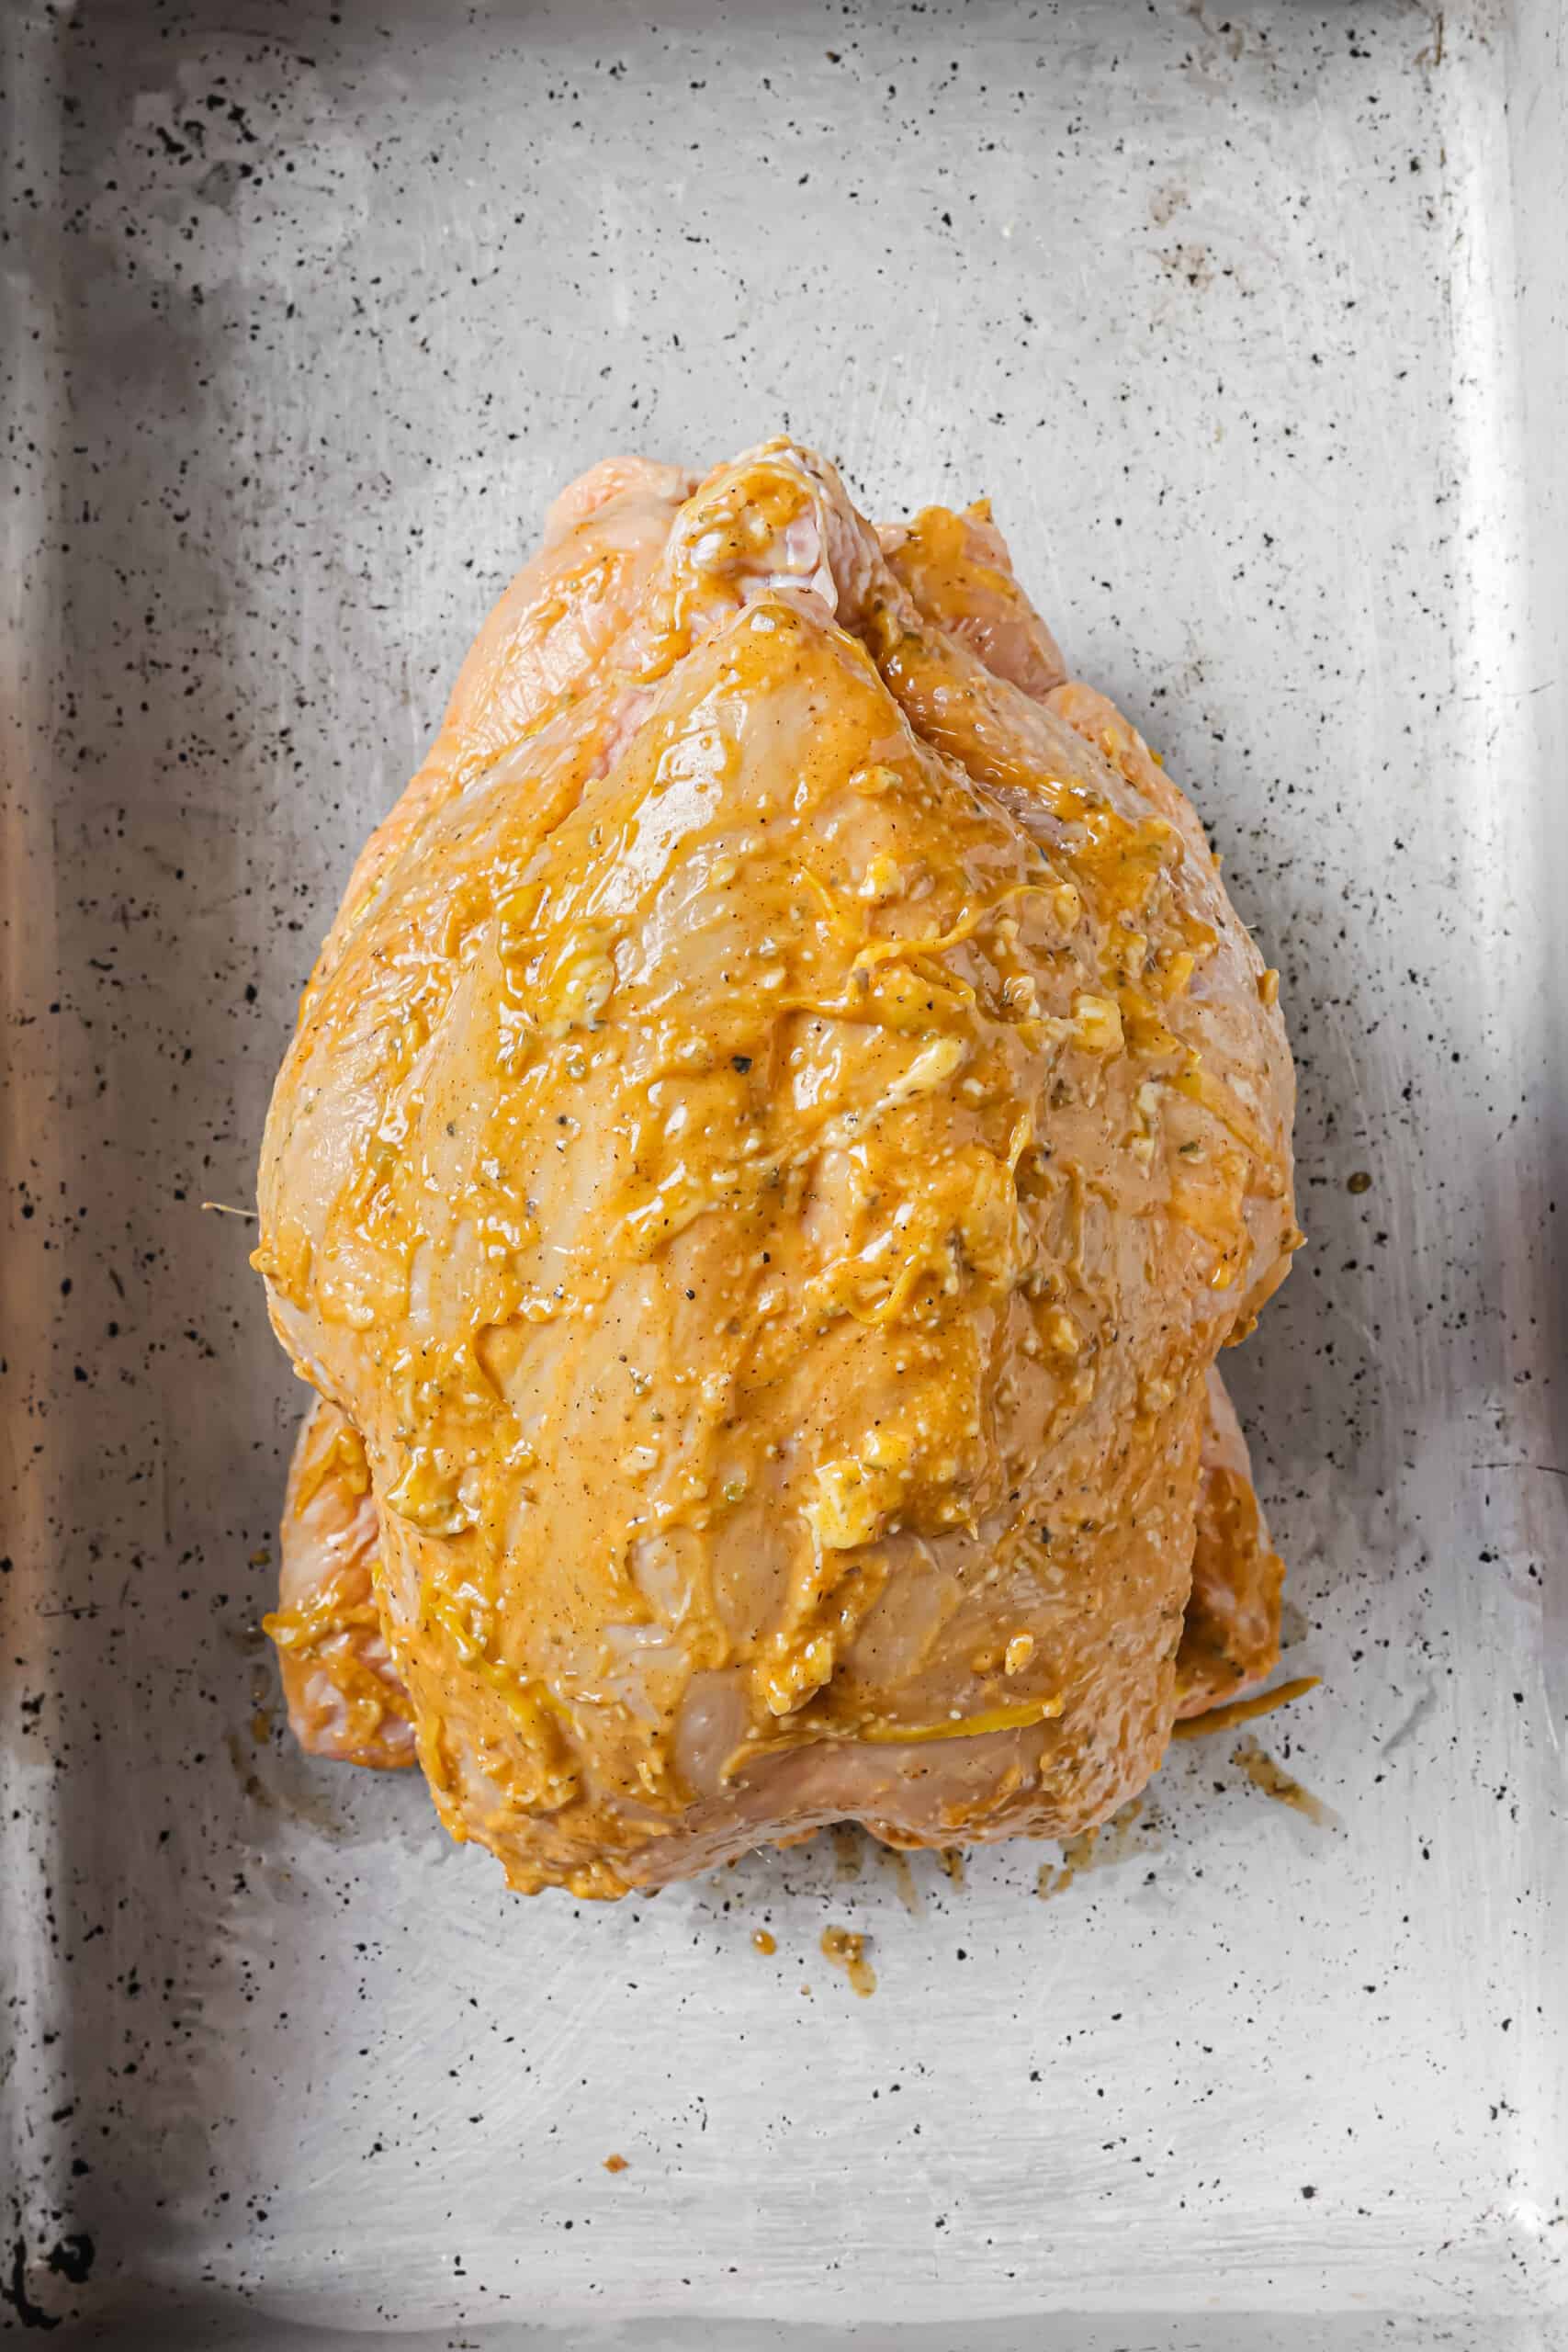 Rubbing the flavored butter on the chicken. 